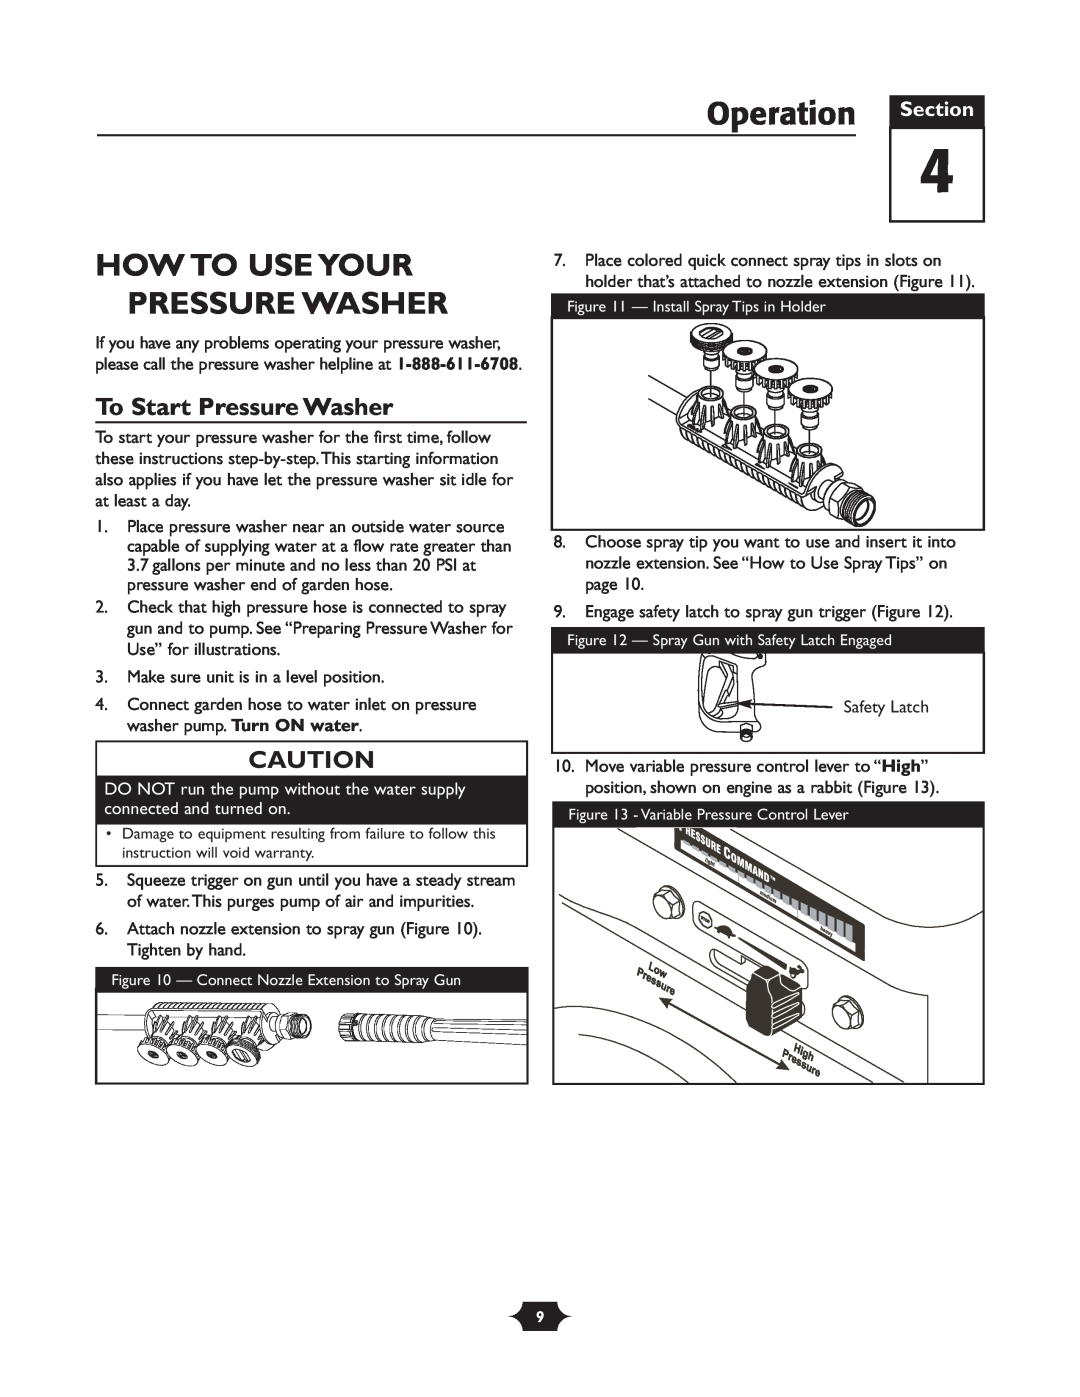 Briggs & Stratton 20209 owner manual Operation Section, How To Use Your, To Start Pressure Washer 